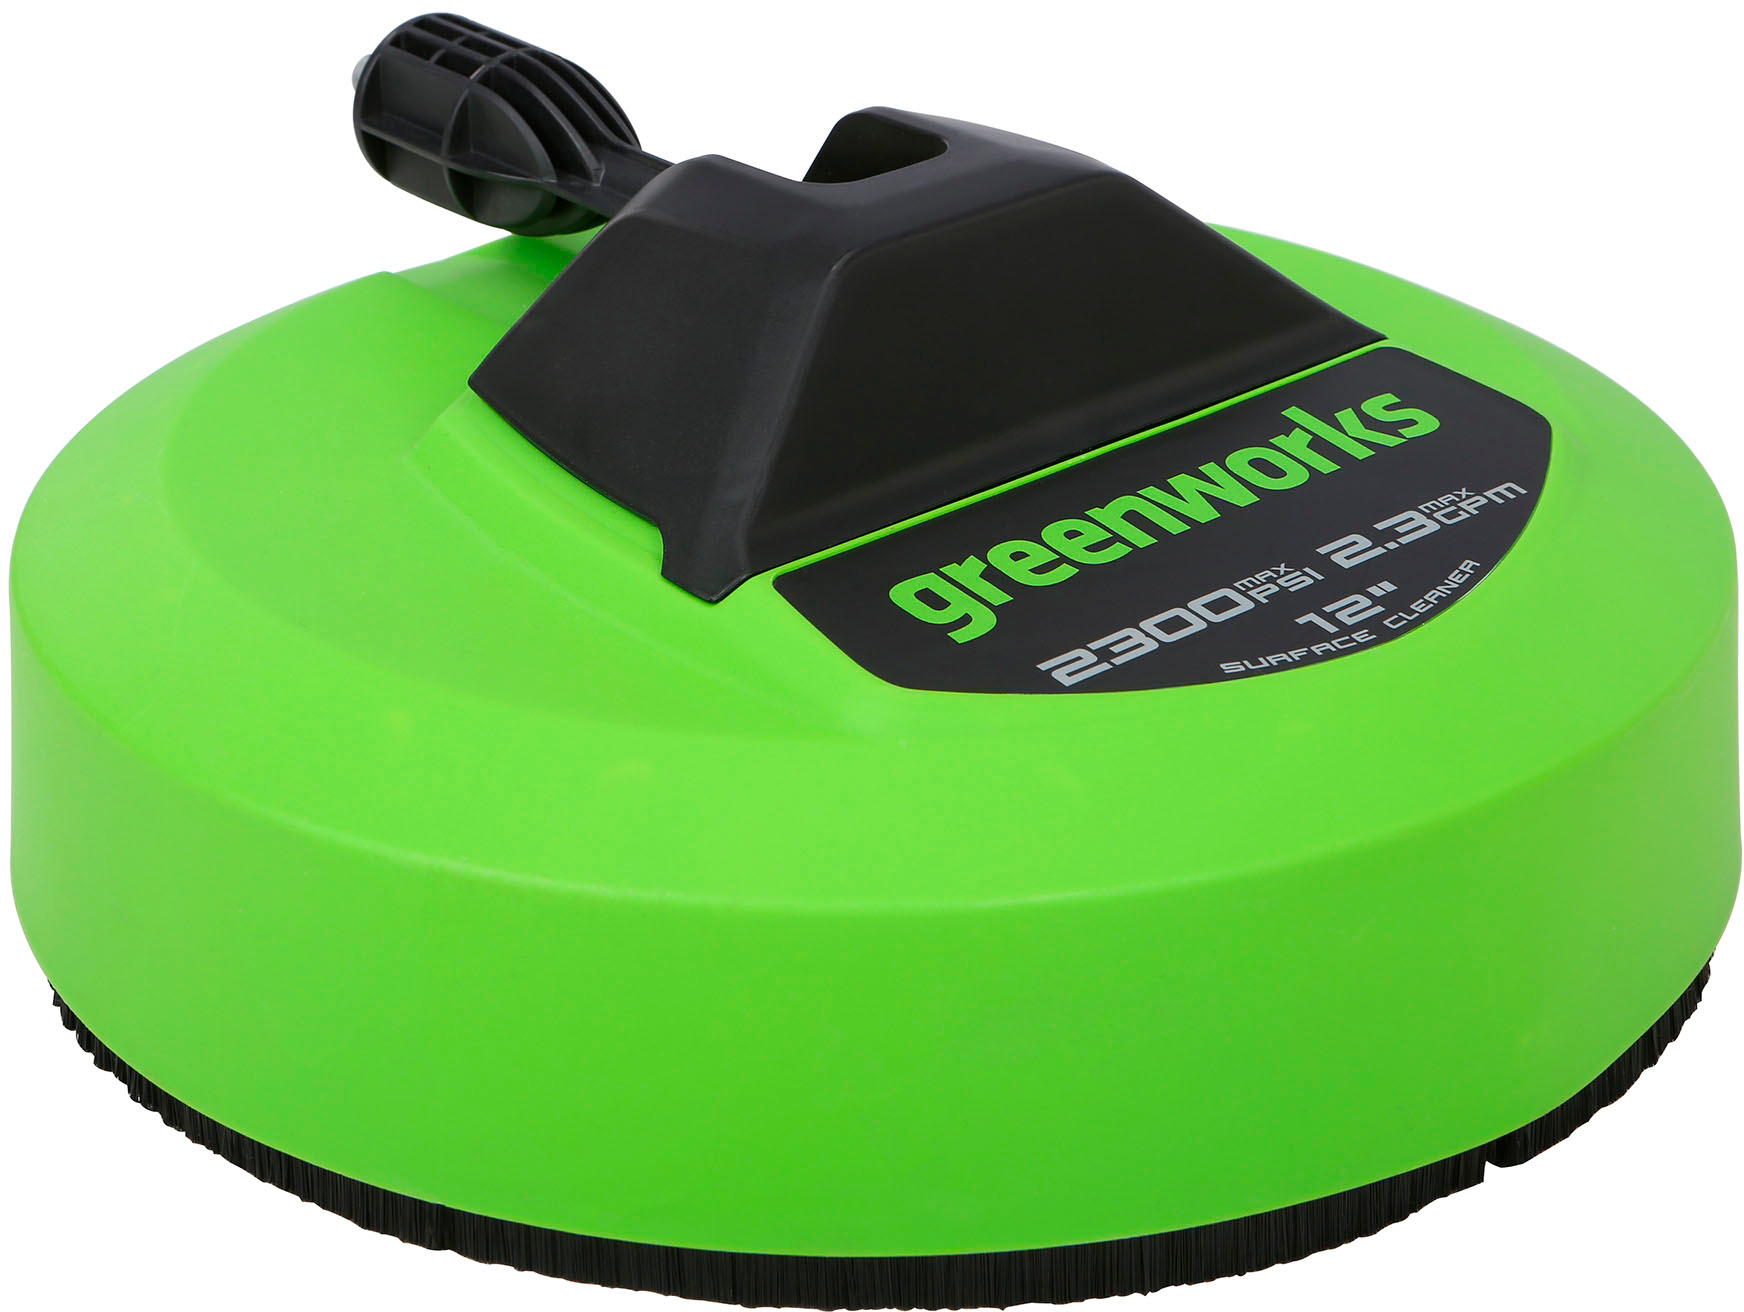 Angle View: Greenworks - 80 Volt Pro Rapid Battery Charger - Black/Green